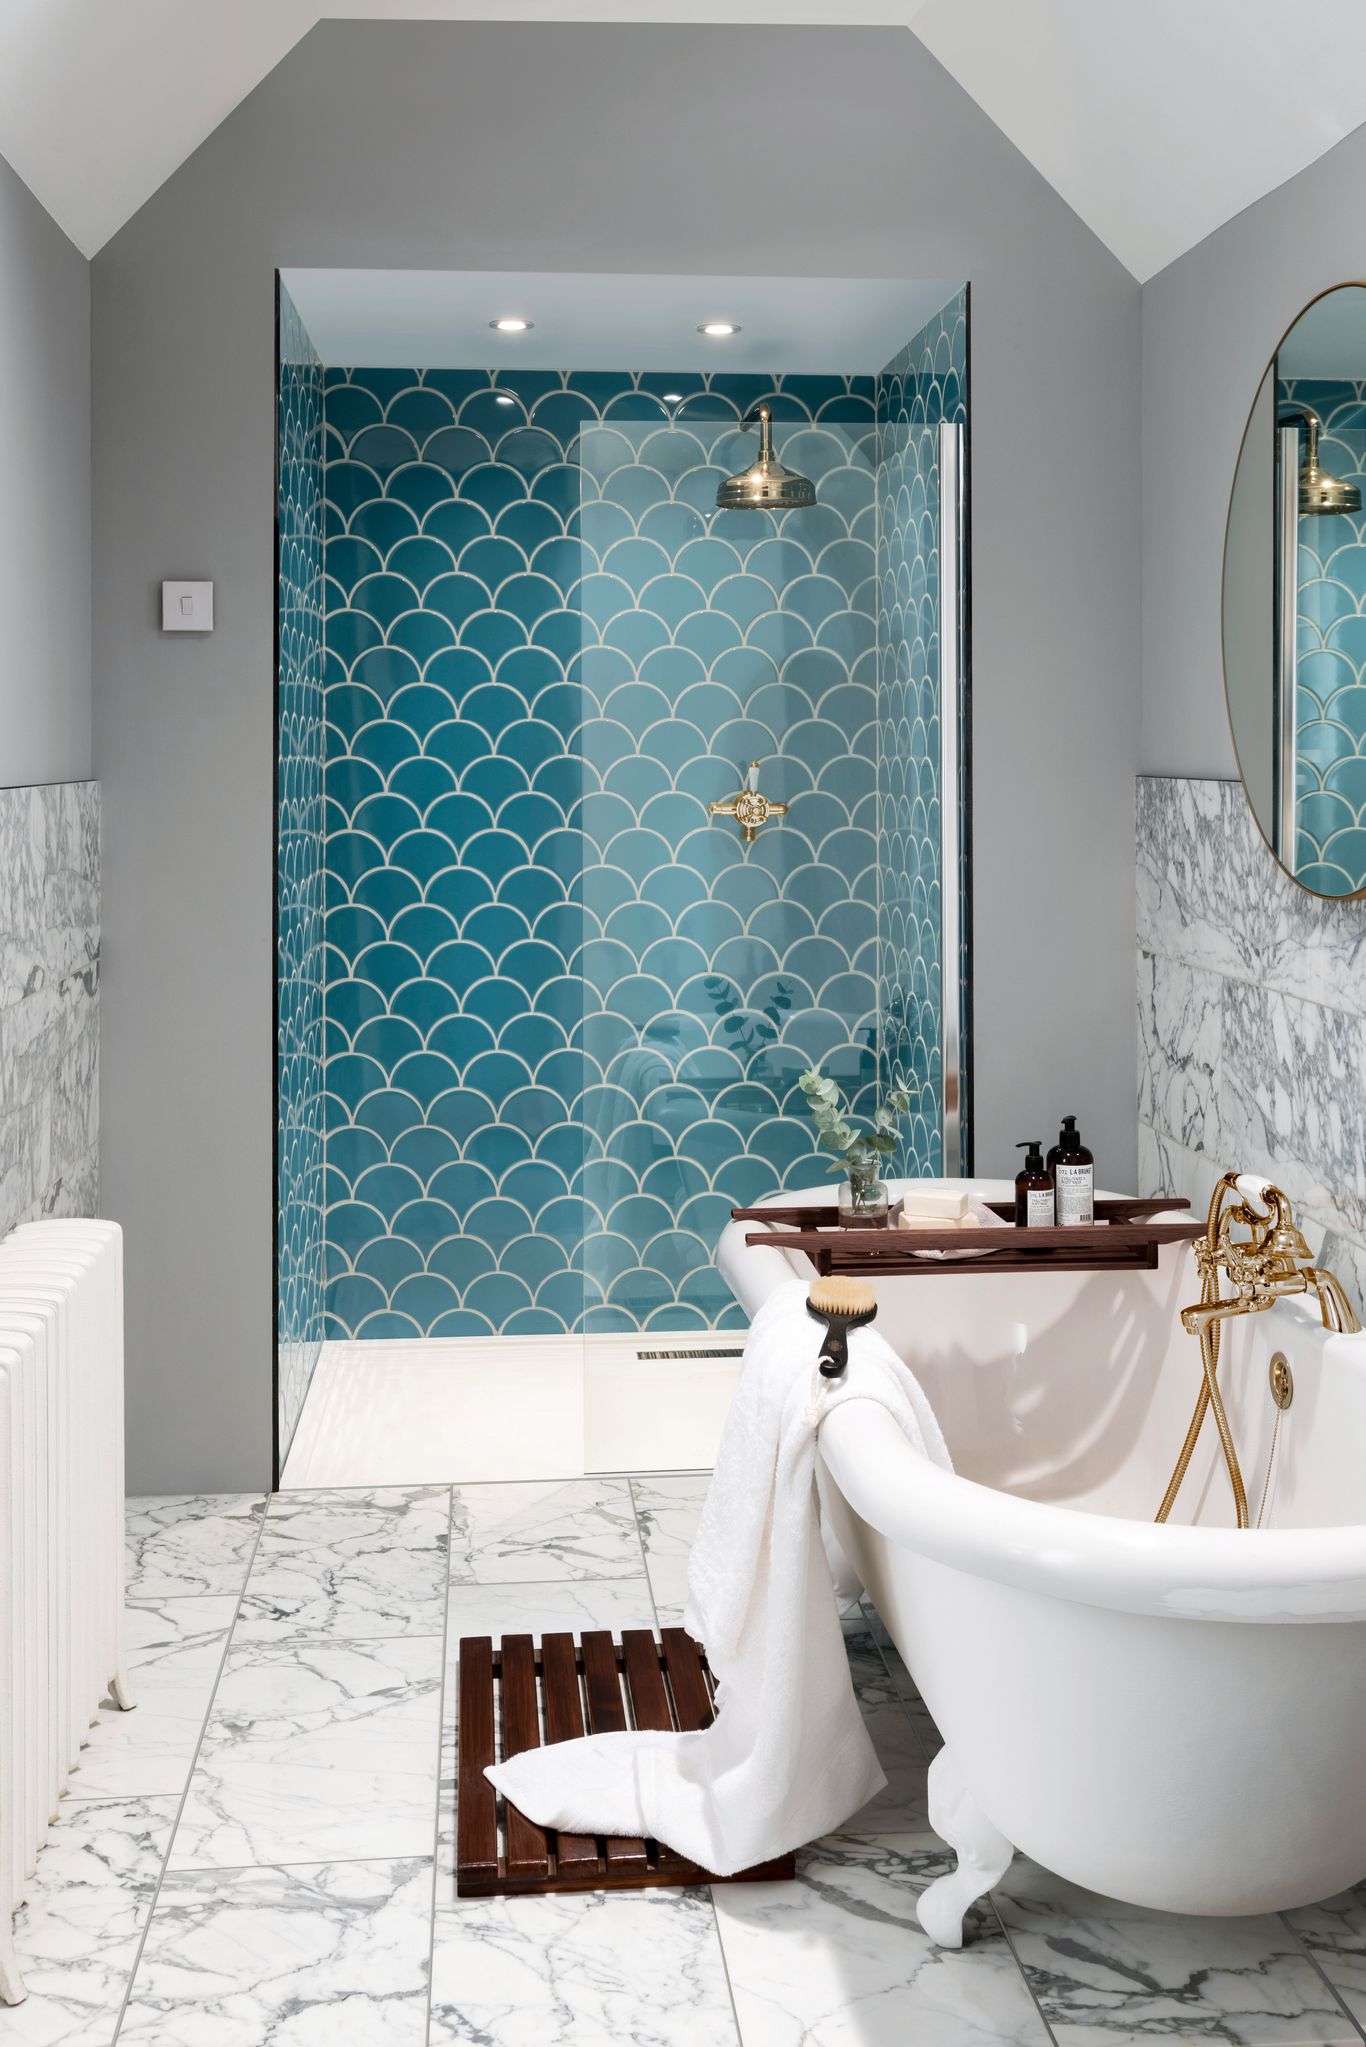 15 small bathroom tile ideas stylish ways to make your space feel